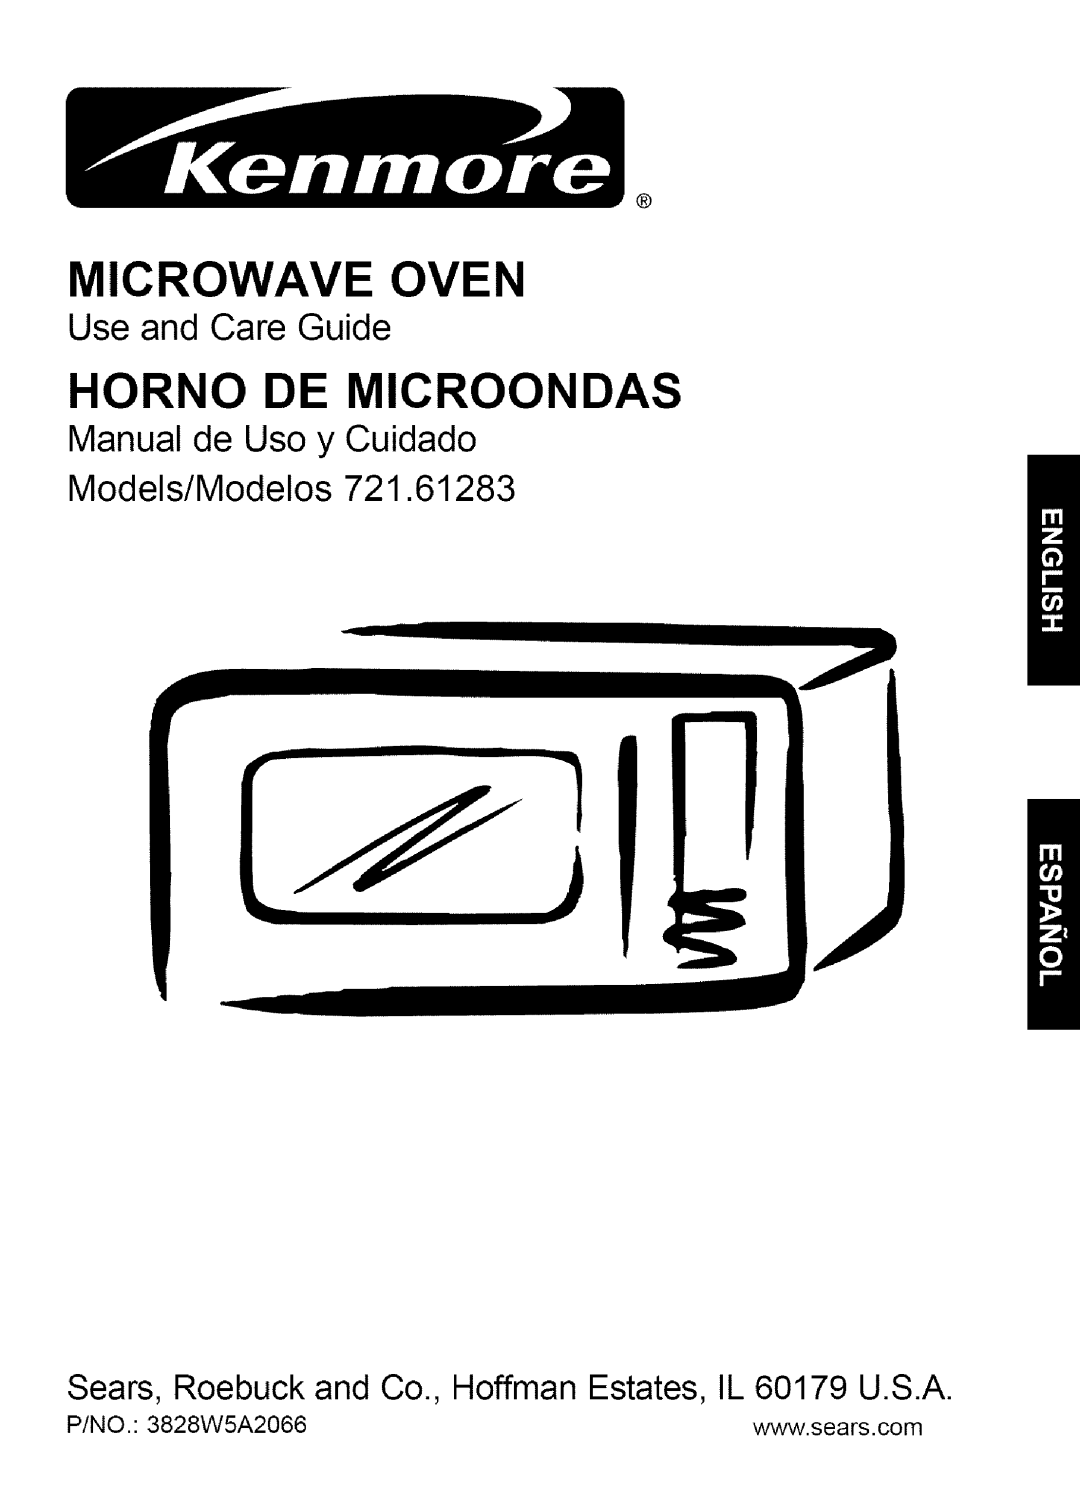 Kenmore 721.61283 manual P/NO. 3828W5A2066, Microwave Oven, Horno De Microondas, Use and Care Guide 